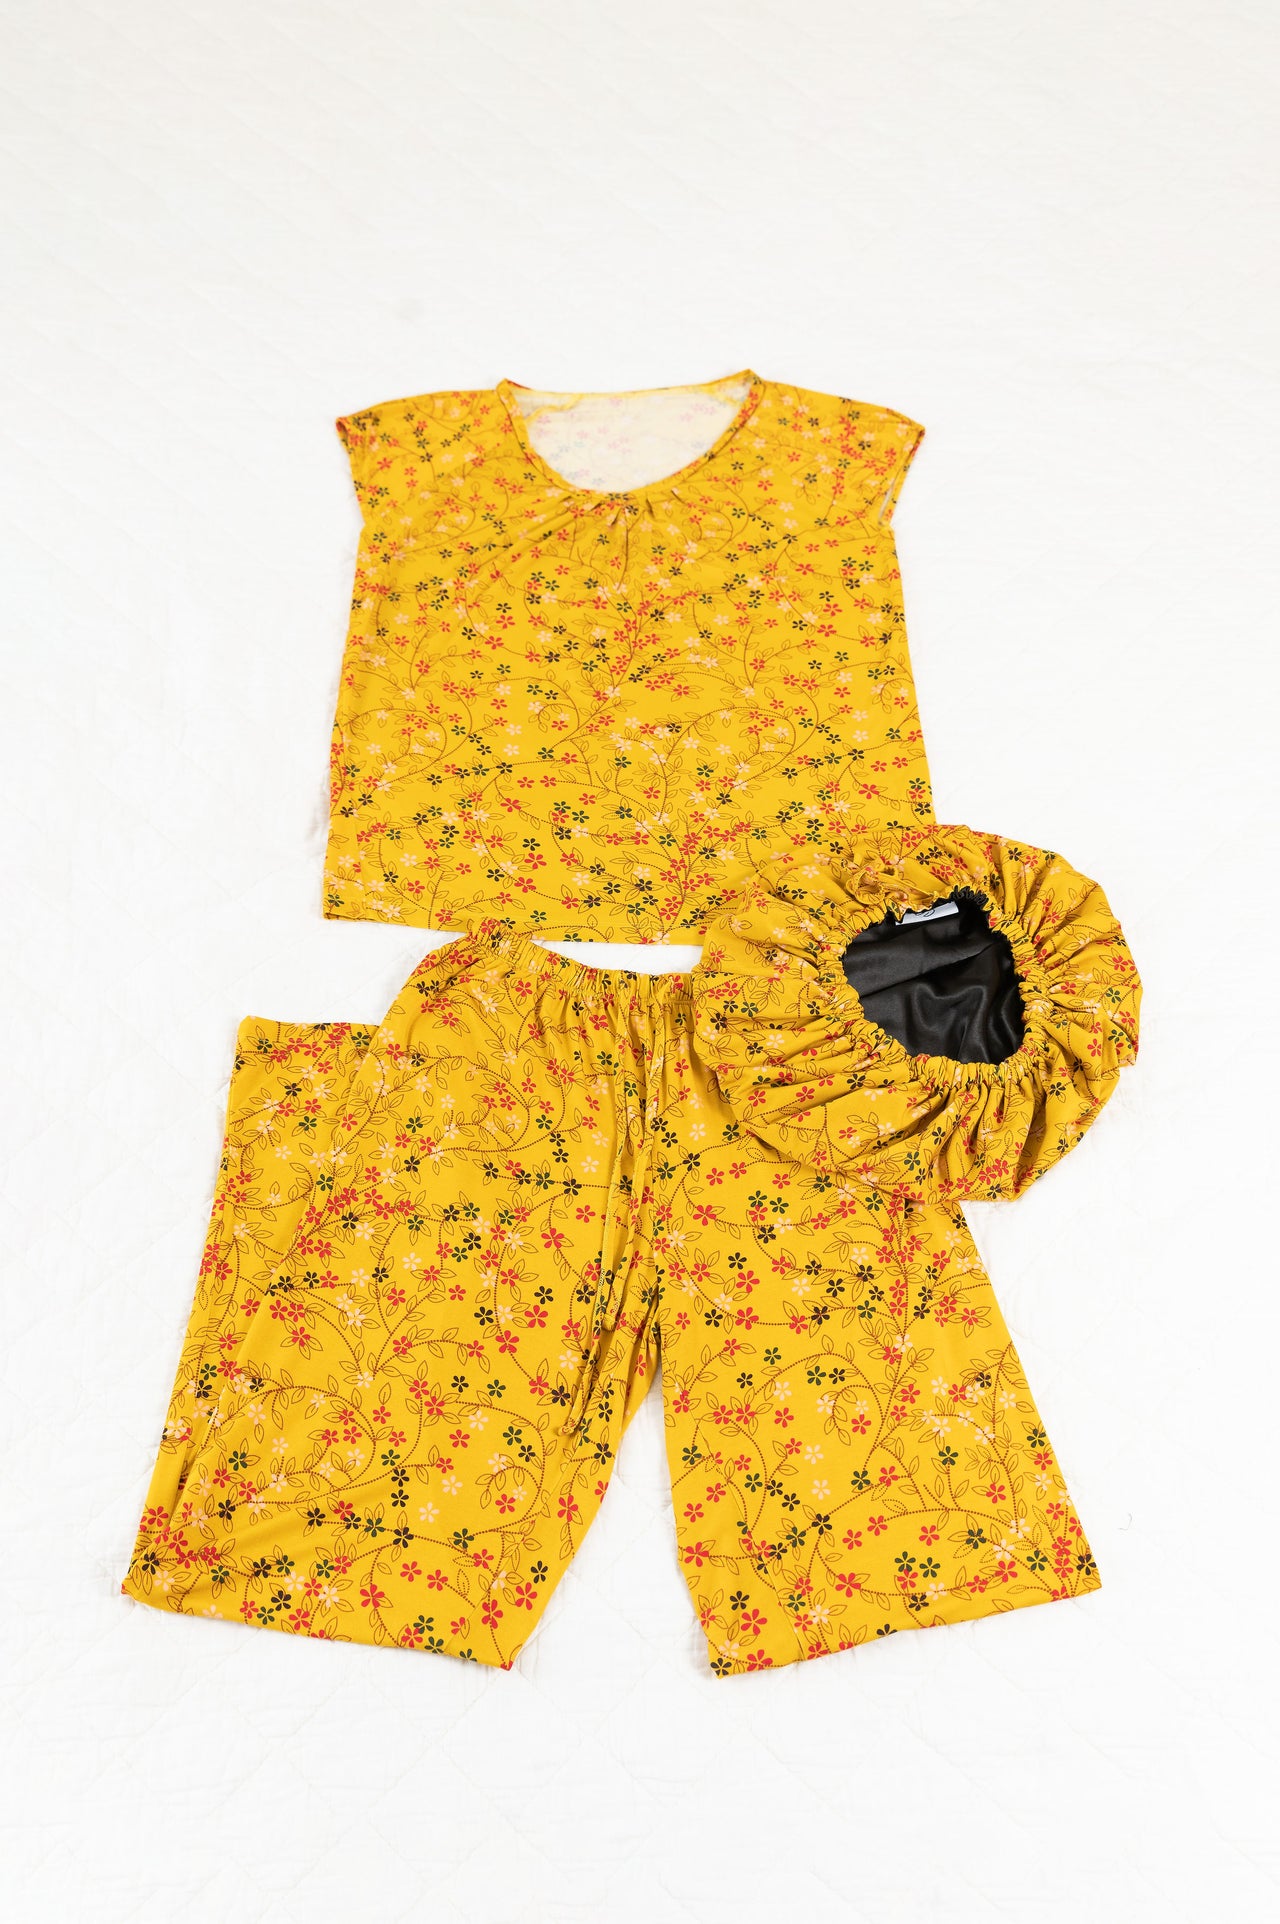 Women's Bamboo Moisture Wicking, Yellow Floral Short Sleeve Pajama Pants Set, With A Matching Satin-Lined Bonnet